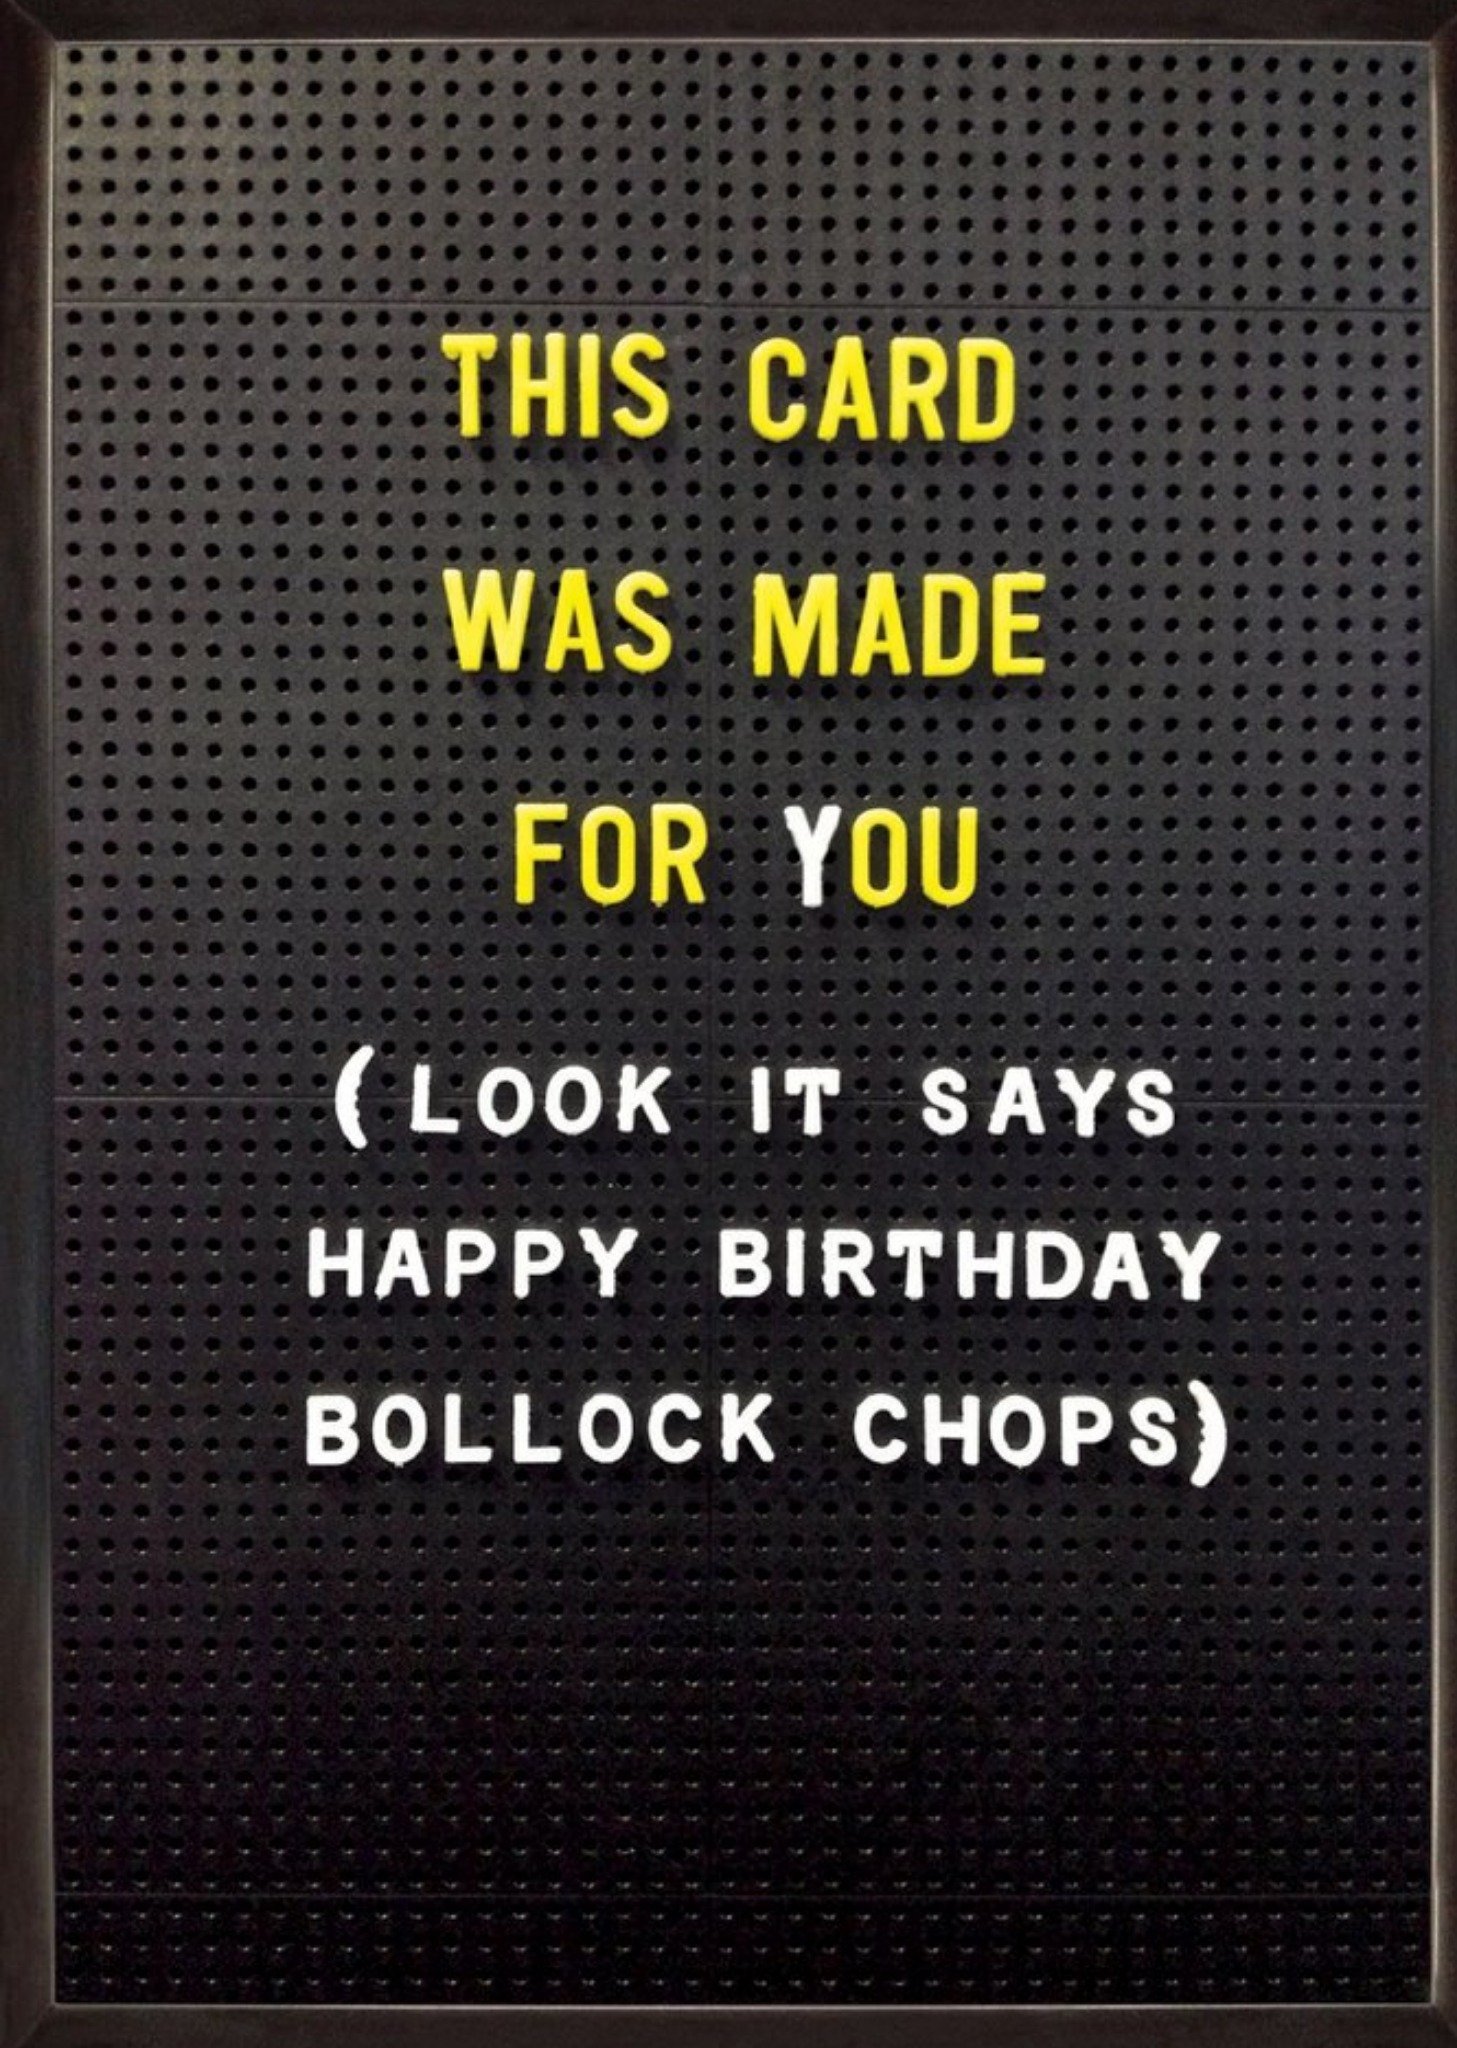 Brainbox Candy Rude Funny Rude Funny This Card Was Made For You Happy Birthday Bollock Chops Card Ec